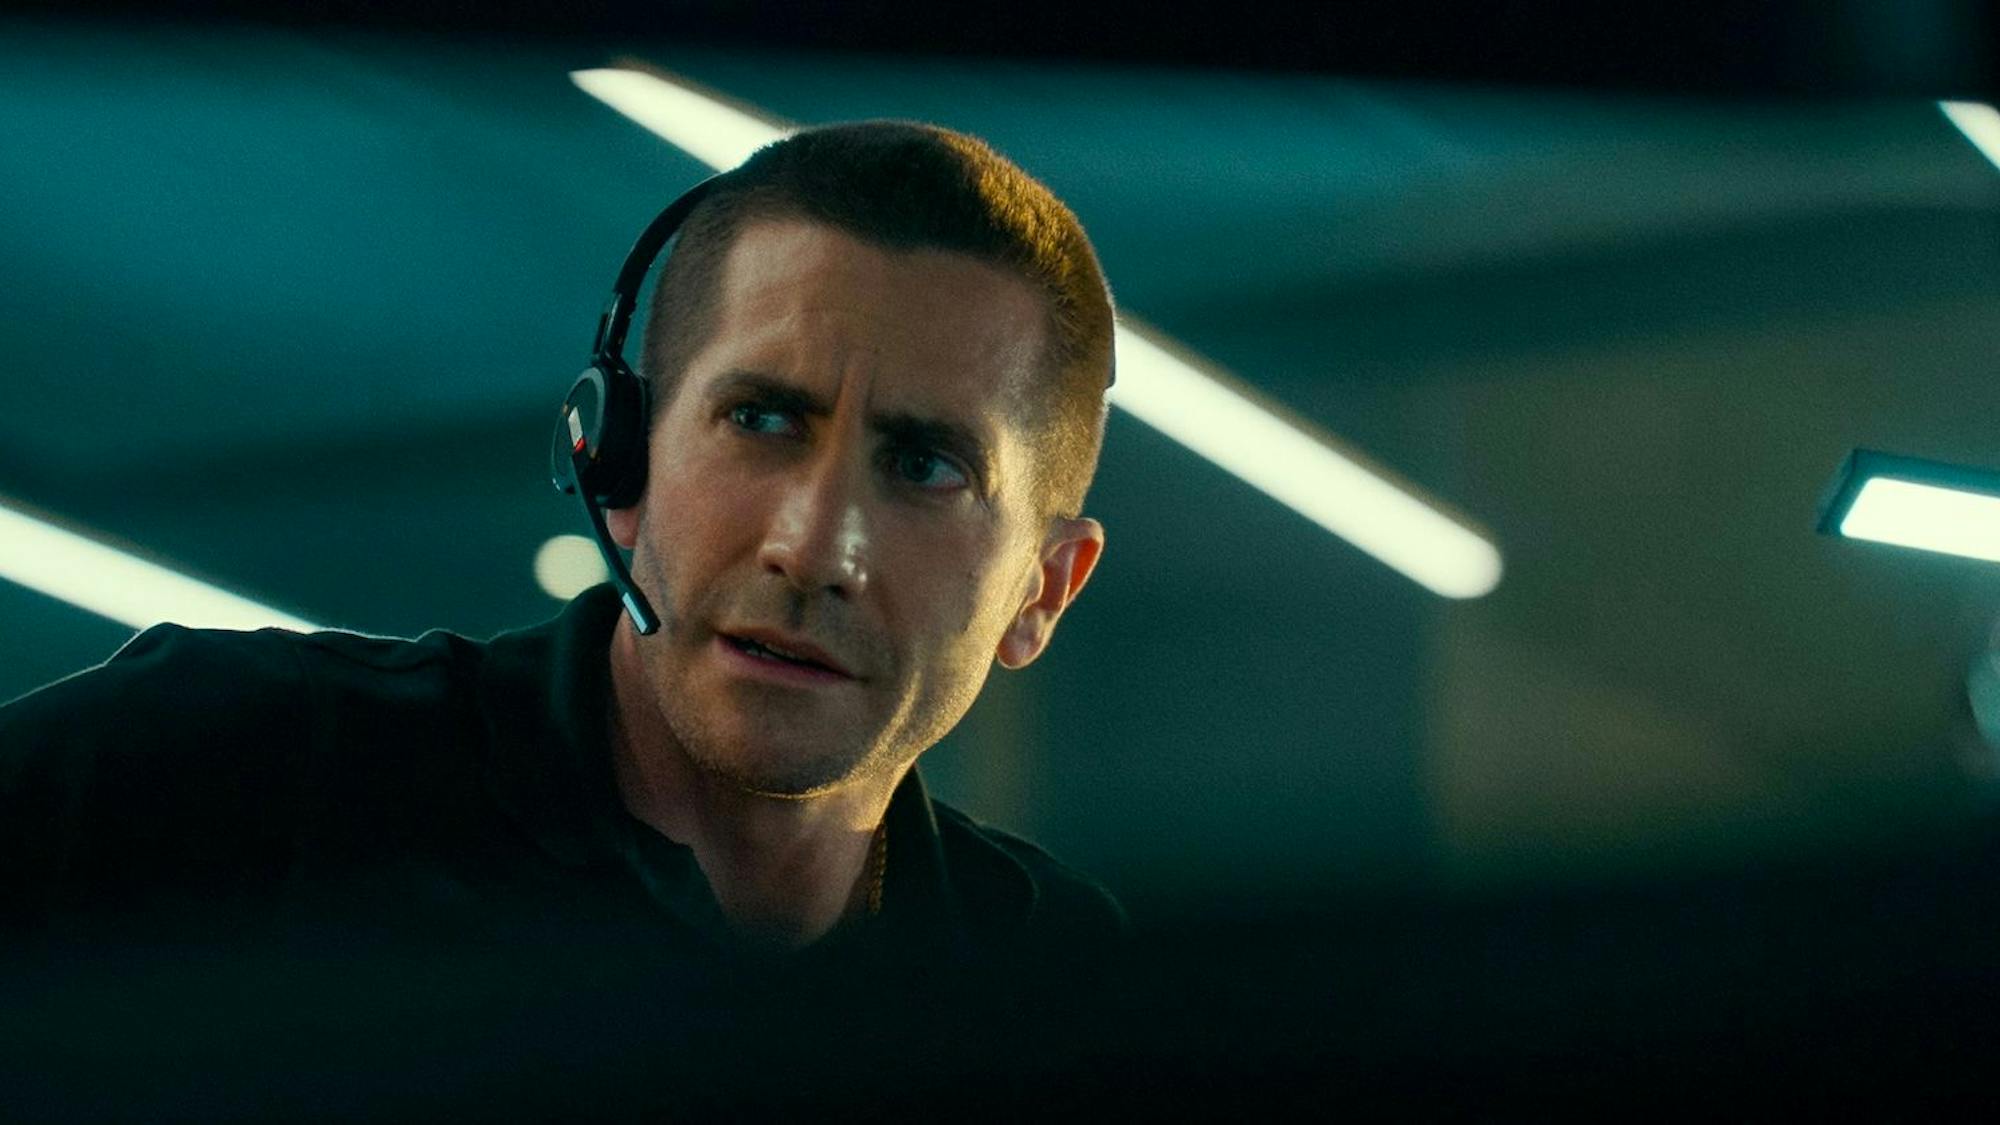 Joe Baylor (Jake Gyllenhaal) in The Guilty (2021) wears a dark polo shirt and a headset.